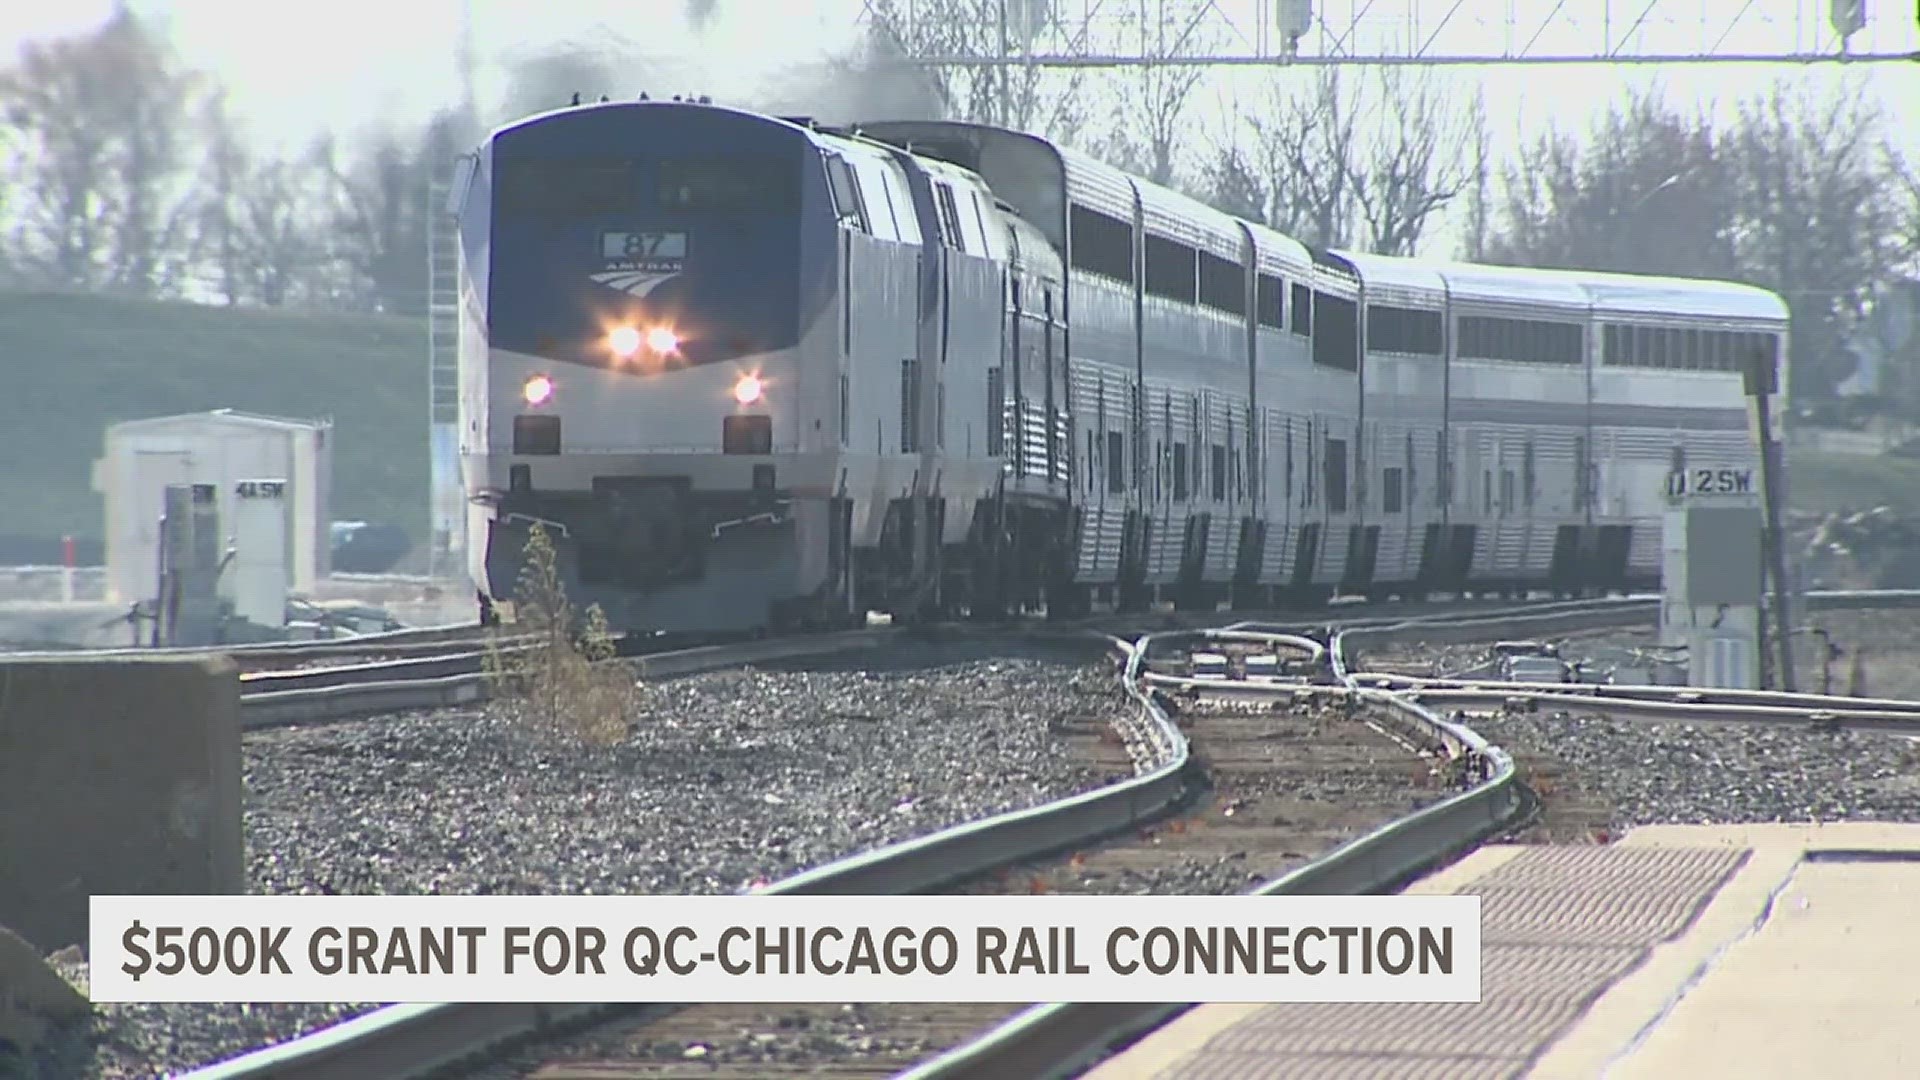 12 rail corridors in Illinois have received $500,000 for expansions and renovations, including the Chicago to Quad Cities corridor.